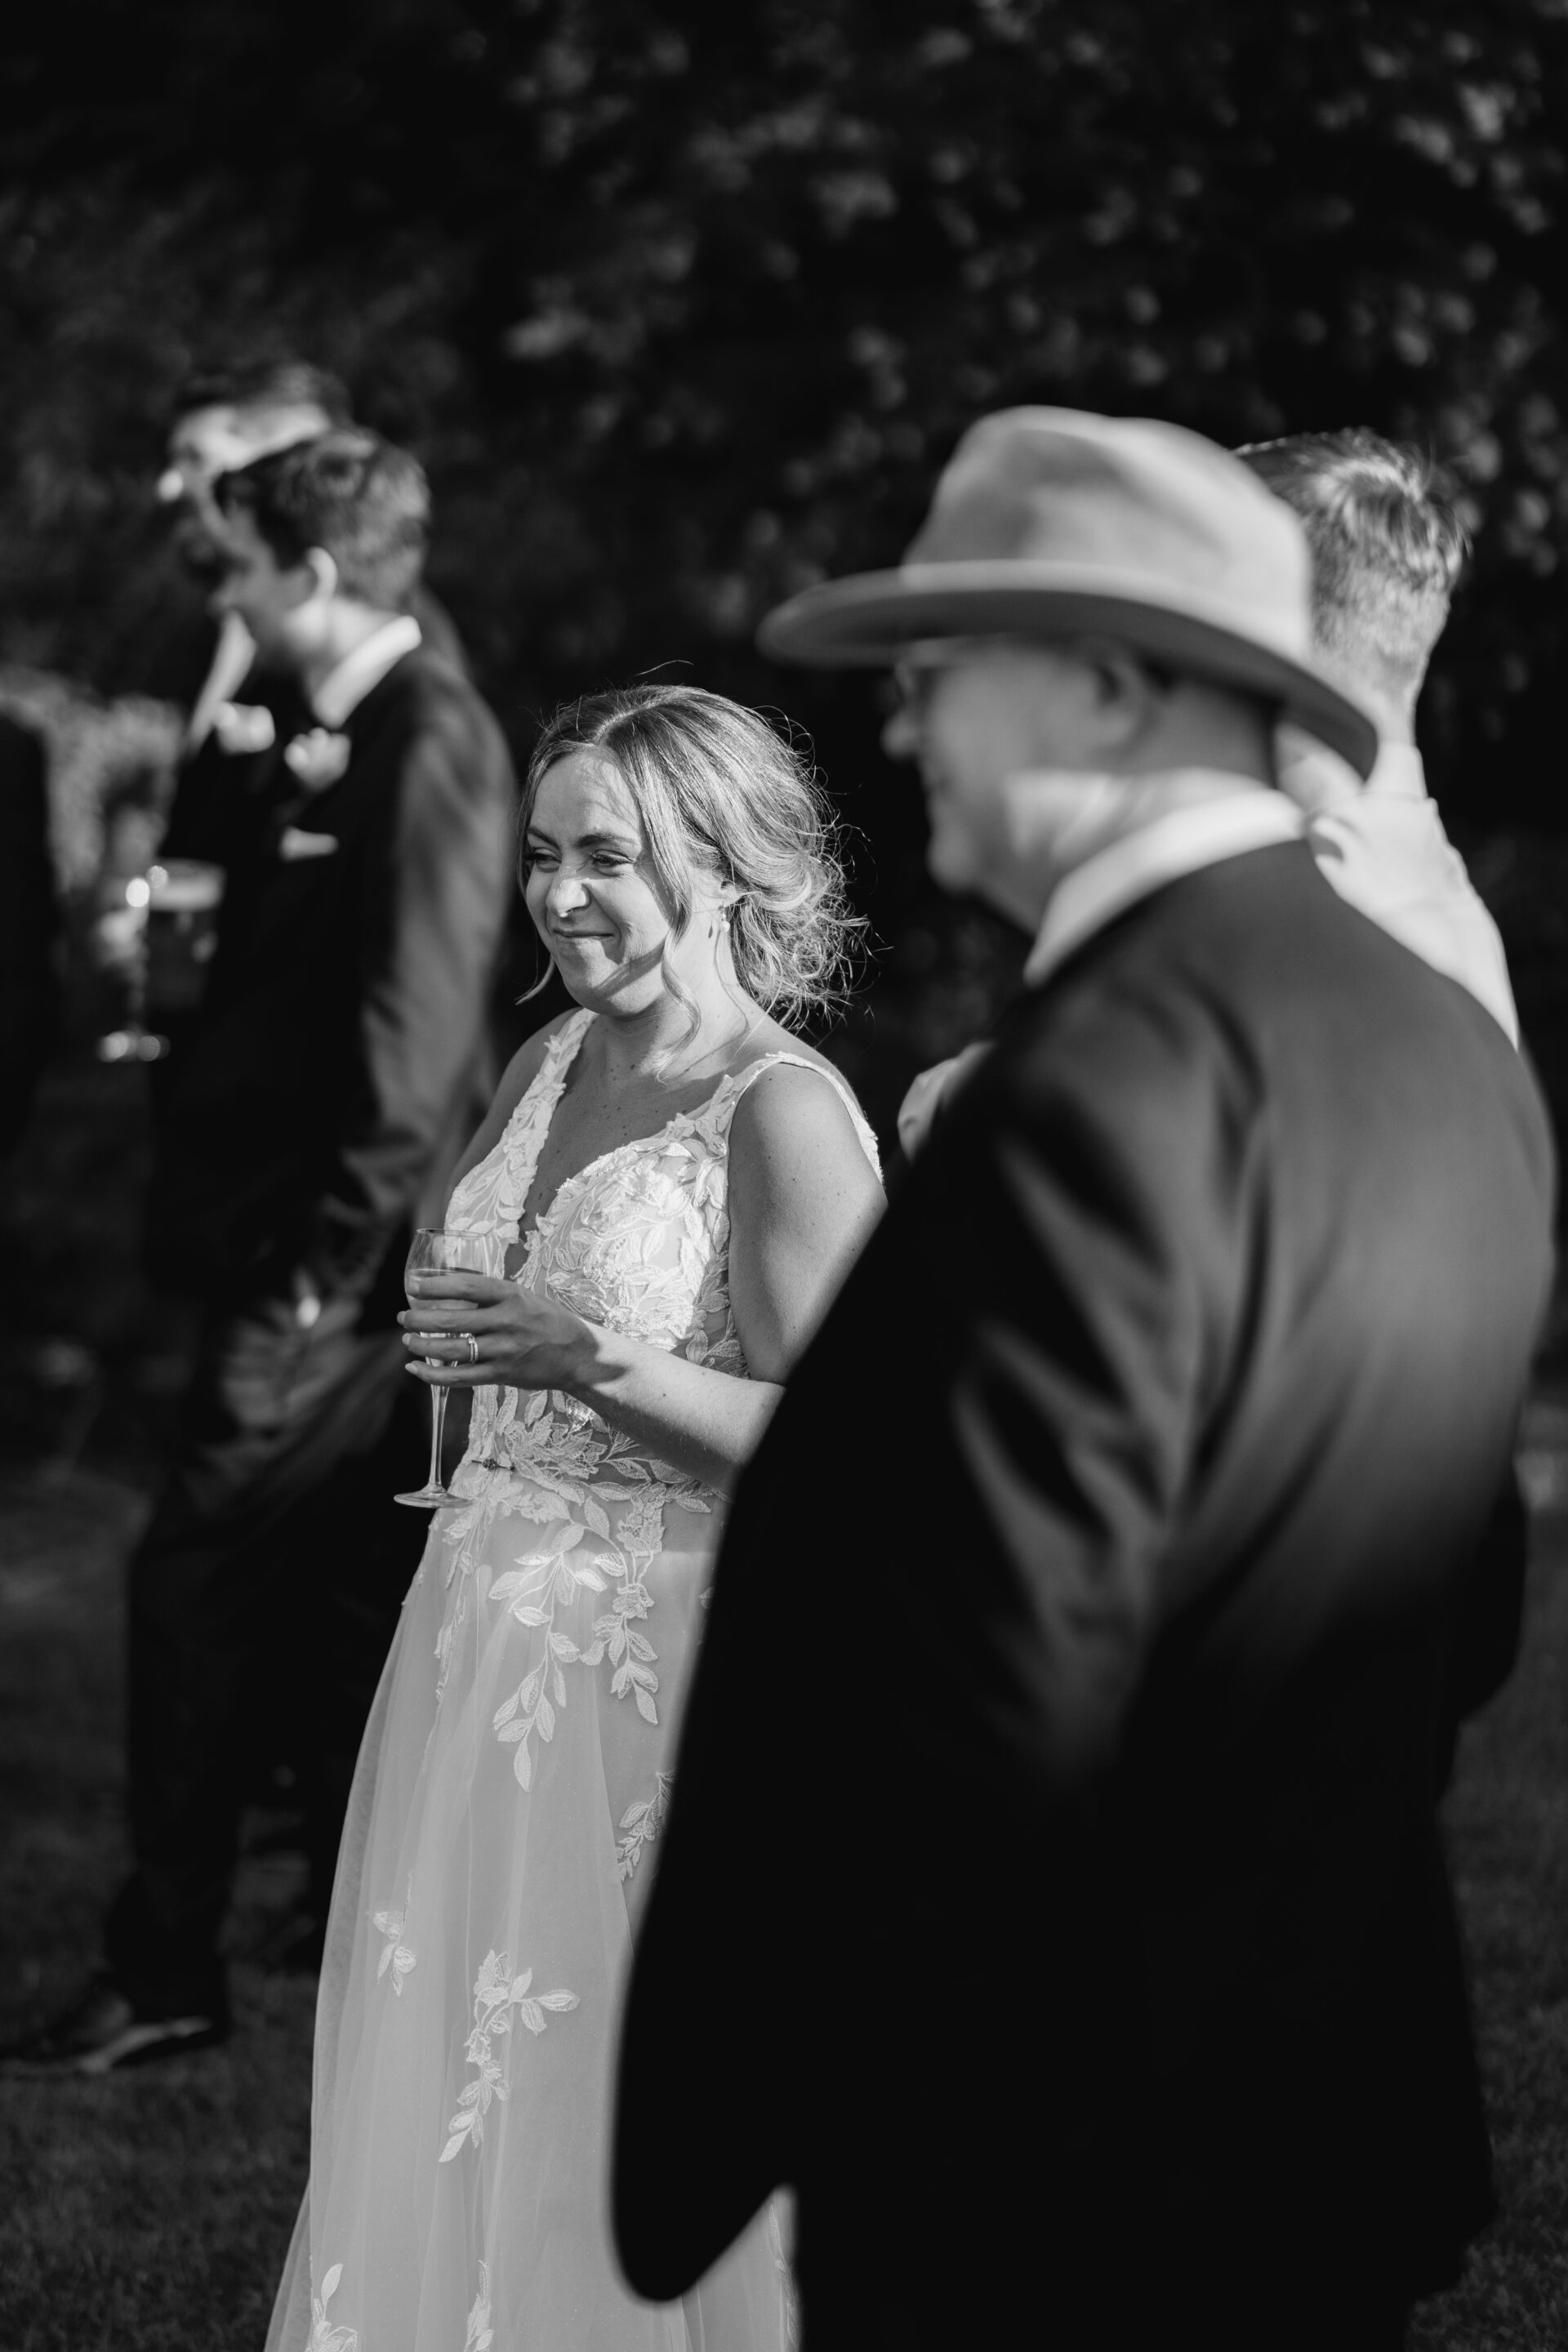 The bride talks with wedding guests at Old Luxters Barn wedding venue in Oxfordshire